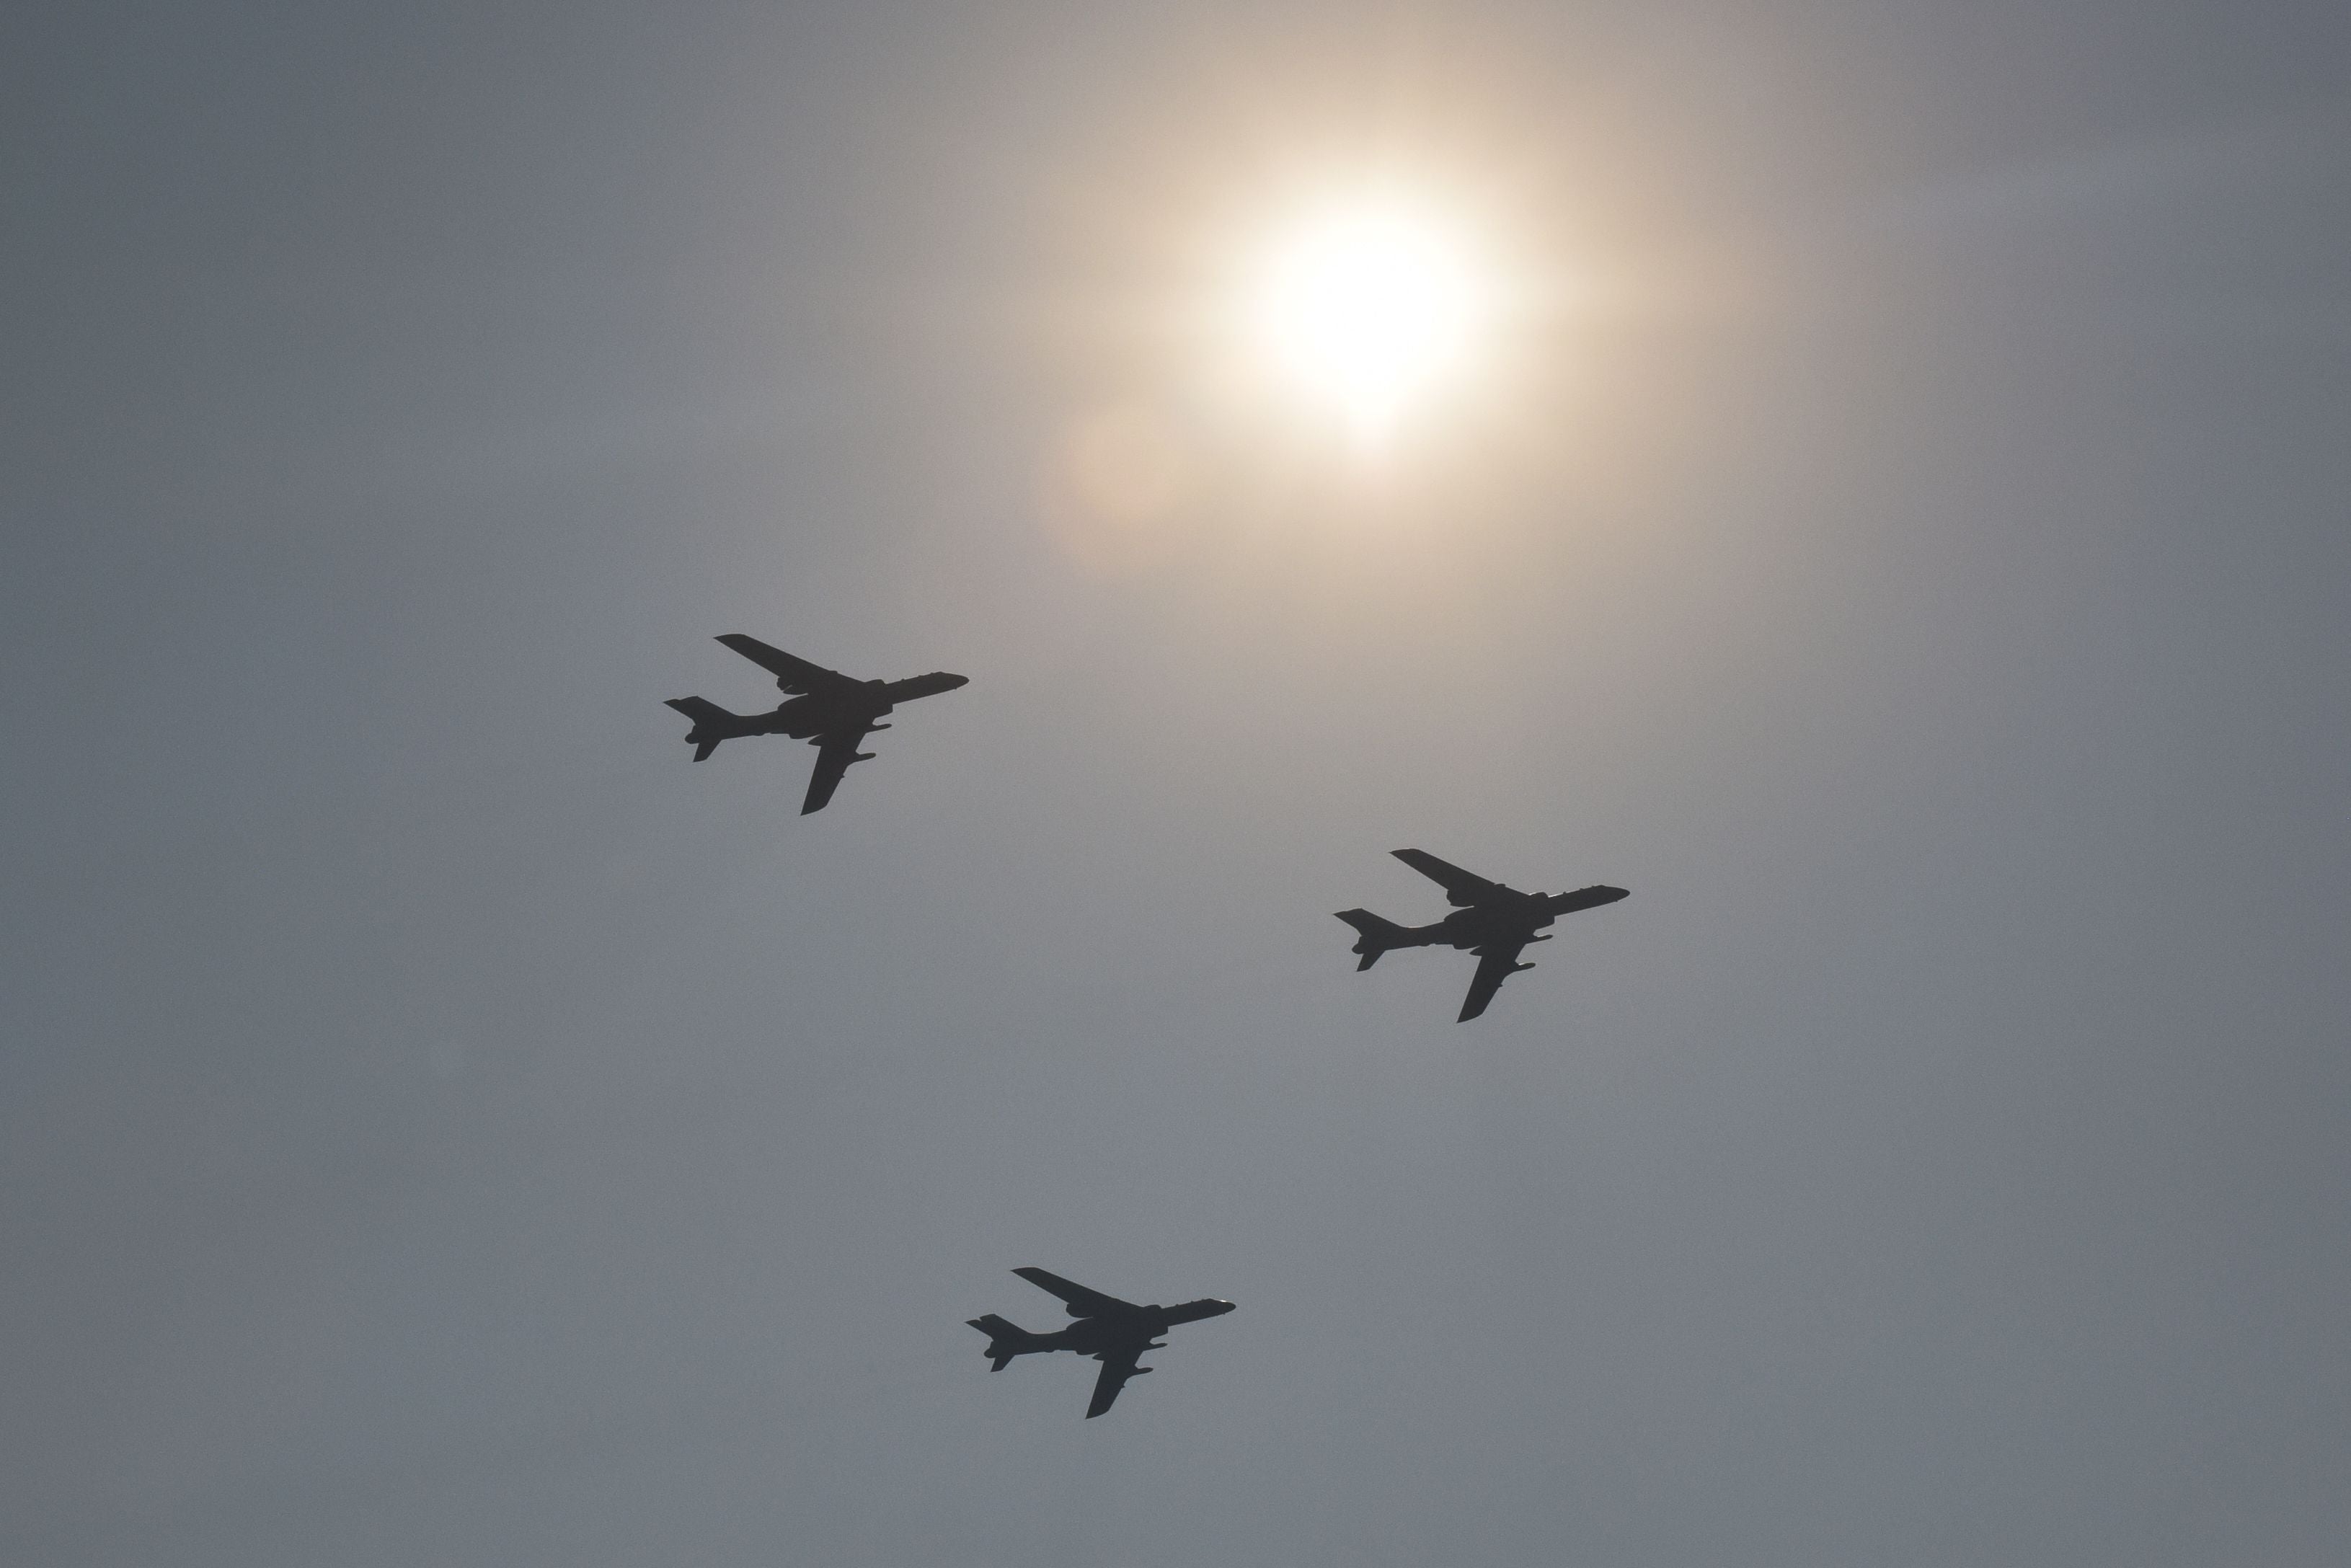 <p>File Image: A formation of military H-6K bombers fly over Beijing during a military parade at Tiananmen Square on October 1, 2019, to mark the 70th anniversary of the founding of the People's Republic of China.</p>